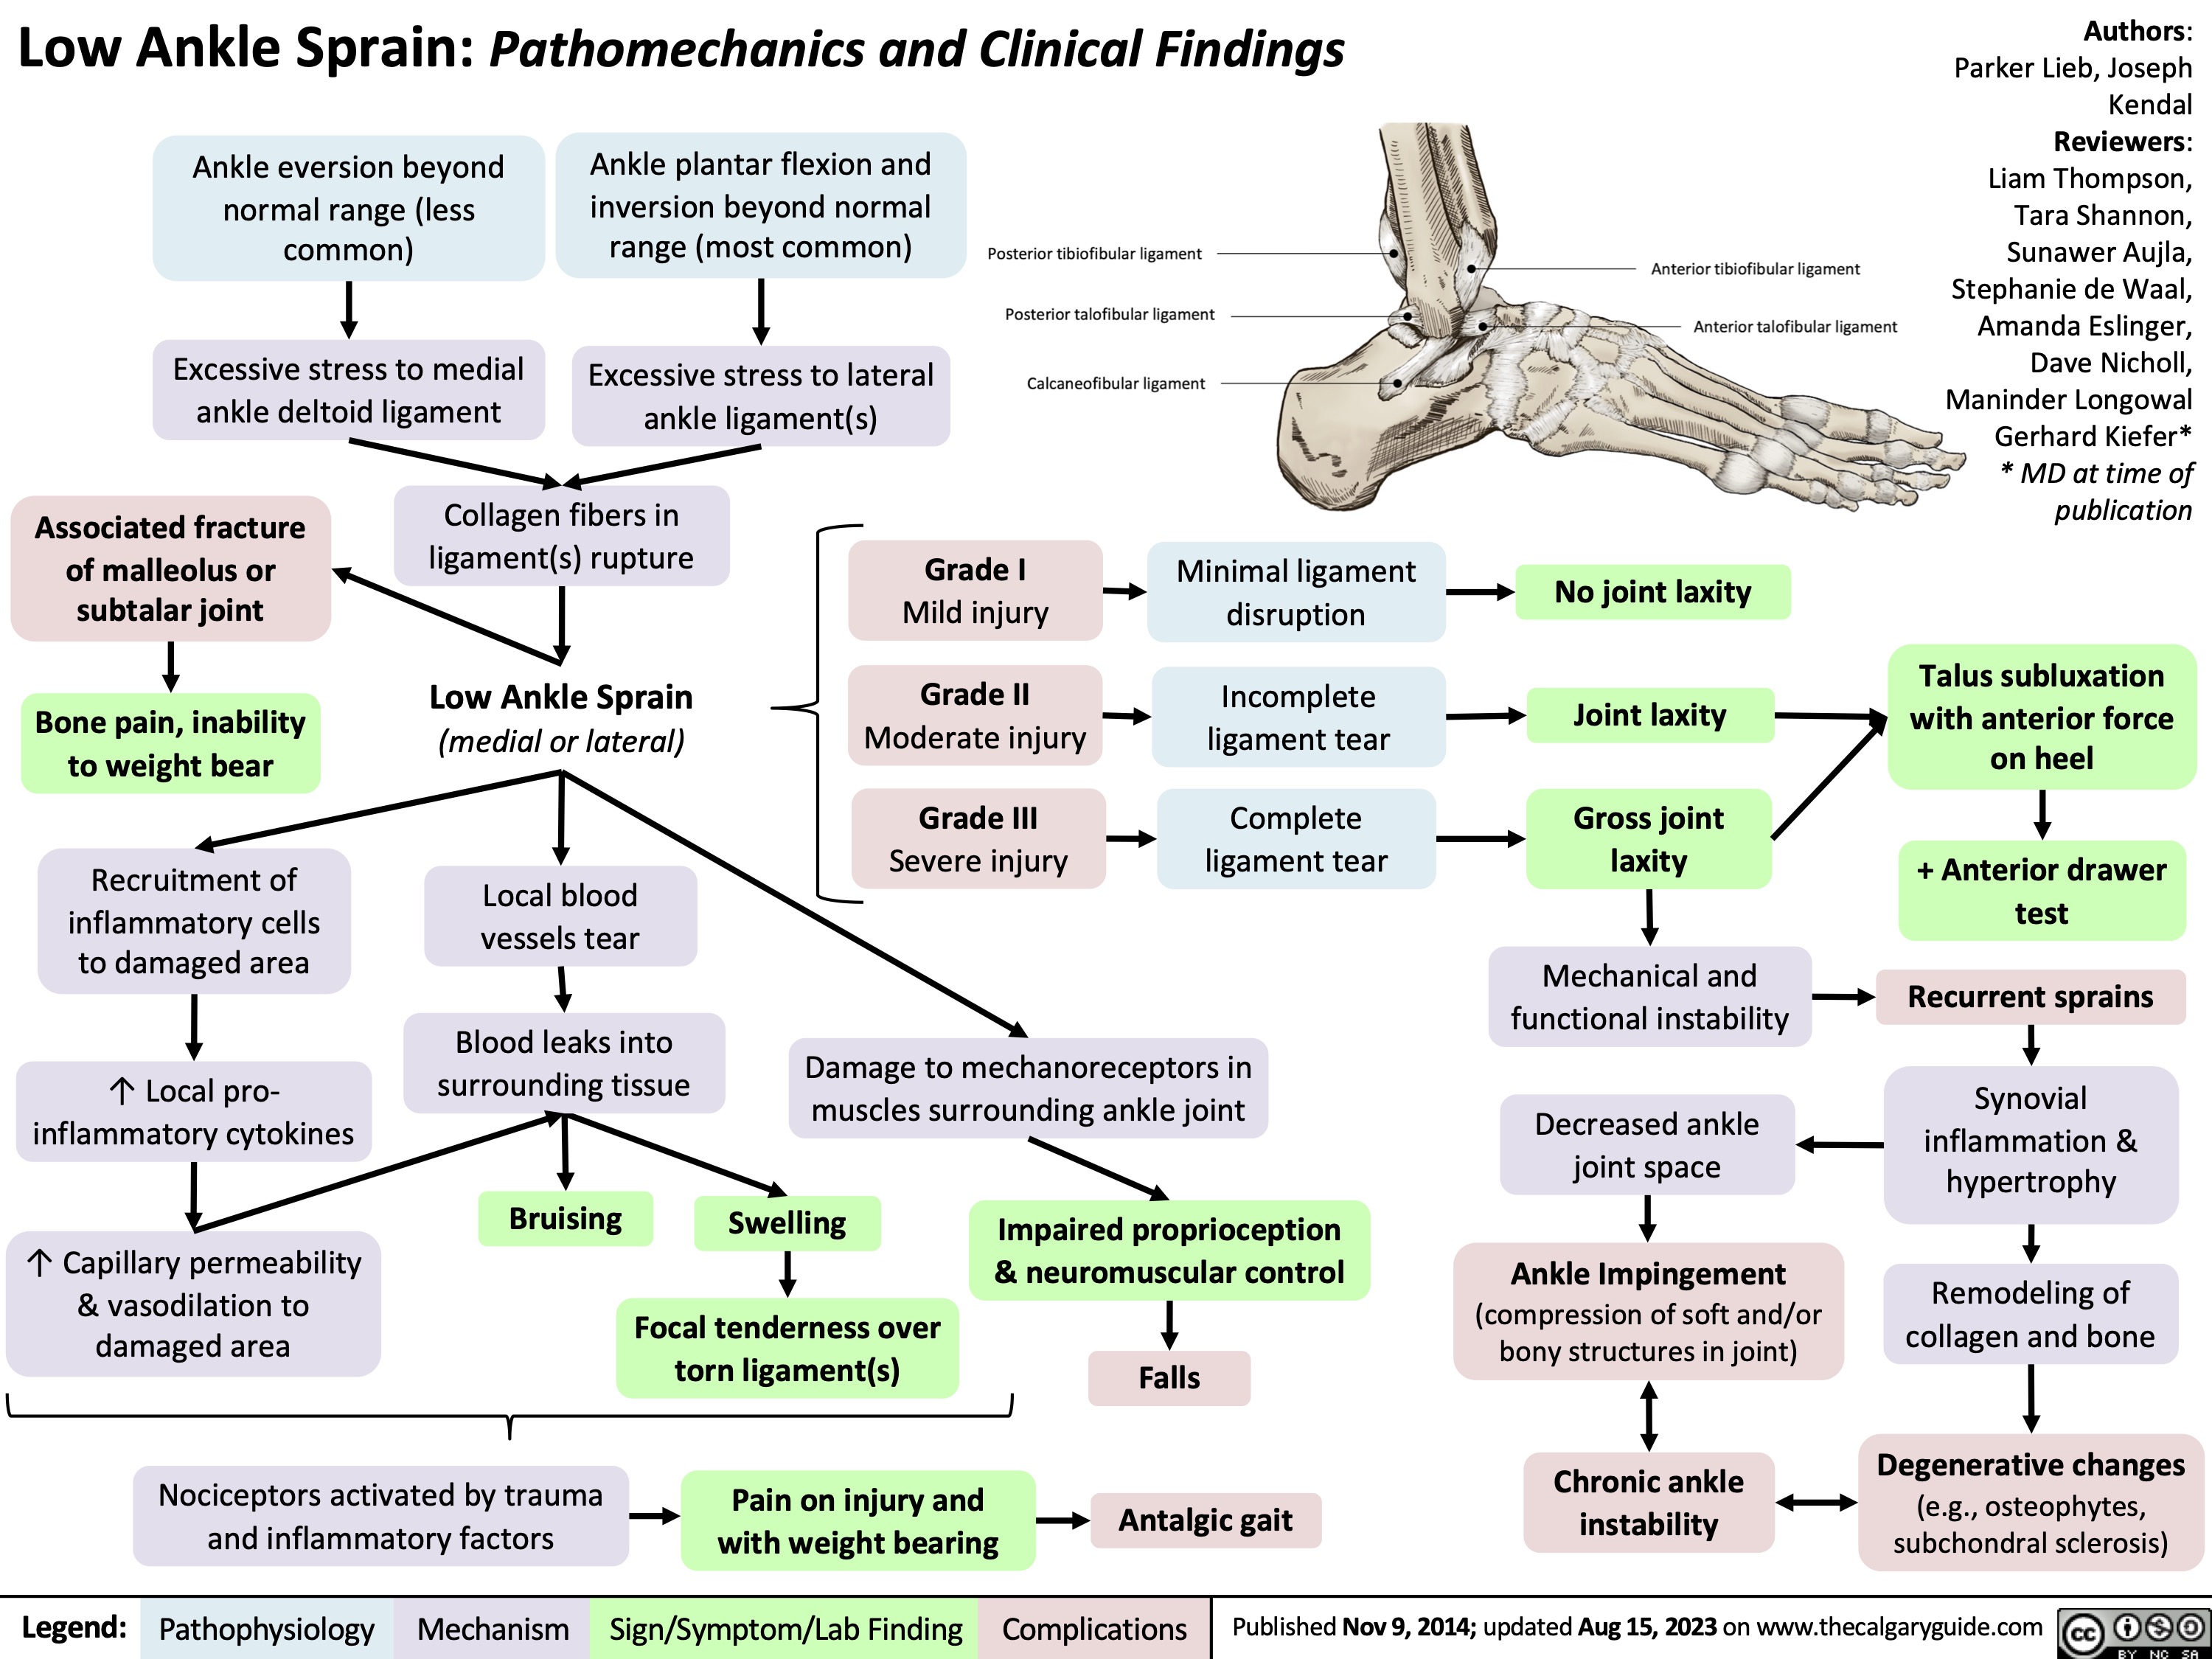 Low Ankle Sprain: Pathomechanics and Clinical Findings
Authors: Parker Lieb, Joseph Kendal Reviewers: Liam Thompson, Tara Shannon, Sunawer Aujla, Stephanie de Waal, Amanda Eslinger, Dave Nicholl, Maninder Longowal Gerhard Kiefer* * MD at time of publication
Talus subluxation with anterior force on heel
+ Anterior drawer test
Recurrent sprains
Synovial inflammation & hypertrophy
Remodeling of collagen and bone
Degenerative changes
(e.g., osteophytes, subchondral sclerosis)
   Ankle eversion beyond normal range (less common)
Excessive stress to medial ankle deltoid ligament
Ankle plantar flexion and inversion beyond normal range (most common)
Excessive stress to lateral ankle ligament(s)
      Associated fracture of malleolus or subtalar joint
Bone pain, inability to weight bear
Recruitment of inflammatory cells to damaged area
↑ Local pro- inflammatory cytokines
↑ Capillary permeability & vasodilation to damaged area
Collagen fibers in ligament(s) rupture
Low Ankle Sprain
(medial or lateral)
Local blood vessels tear
Blood leaks into surrounding tissue
Grade I
Mild injury
Grade II
Moderate injury
Grade III
Severe injury
Minimal ligament disruption
Incomplete ligament tear
Complete ligament tear
No joint laxity
Joint laxity
Gross joint laxity
Mechanical and functional instability
Decreased ankle joint space
Ankle Impingement
(compression of soft and/or bony structures in joint)
Chronic ankle instability
                        Damage to mechanoreceptors in muscles surrounding ankle joint
       Bruising
Swelling
Focal tenderness over torn ligament(s)
Pain on injury and with weight bearing
 Impaired proprioception & neuromuscular control
          Nociceptors activated by trauma and inflammatory factors
Falls Antalgic gait
  Legend:
 Pathophysiology
 Mechanism
Sign/Symptom/Lab Finding
 Complications
 Published Nov 9, 2014; updated Aug 15, 2023 on www.thecalgaryguide.com
  